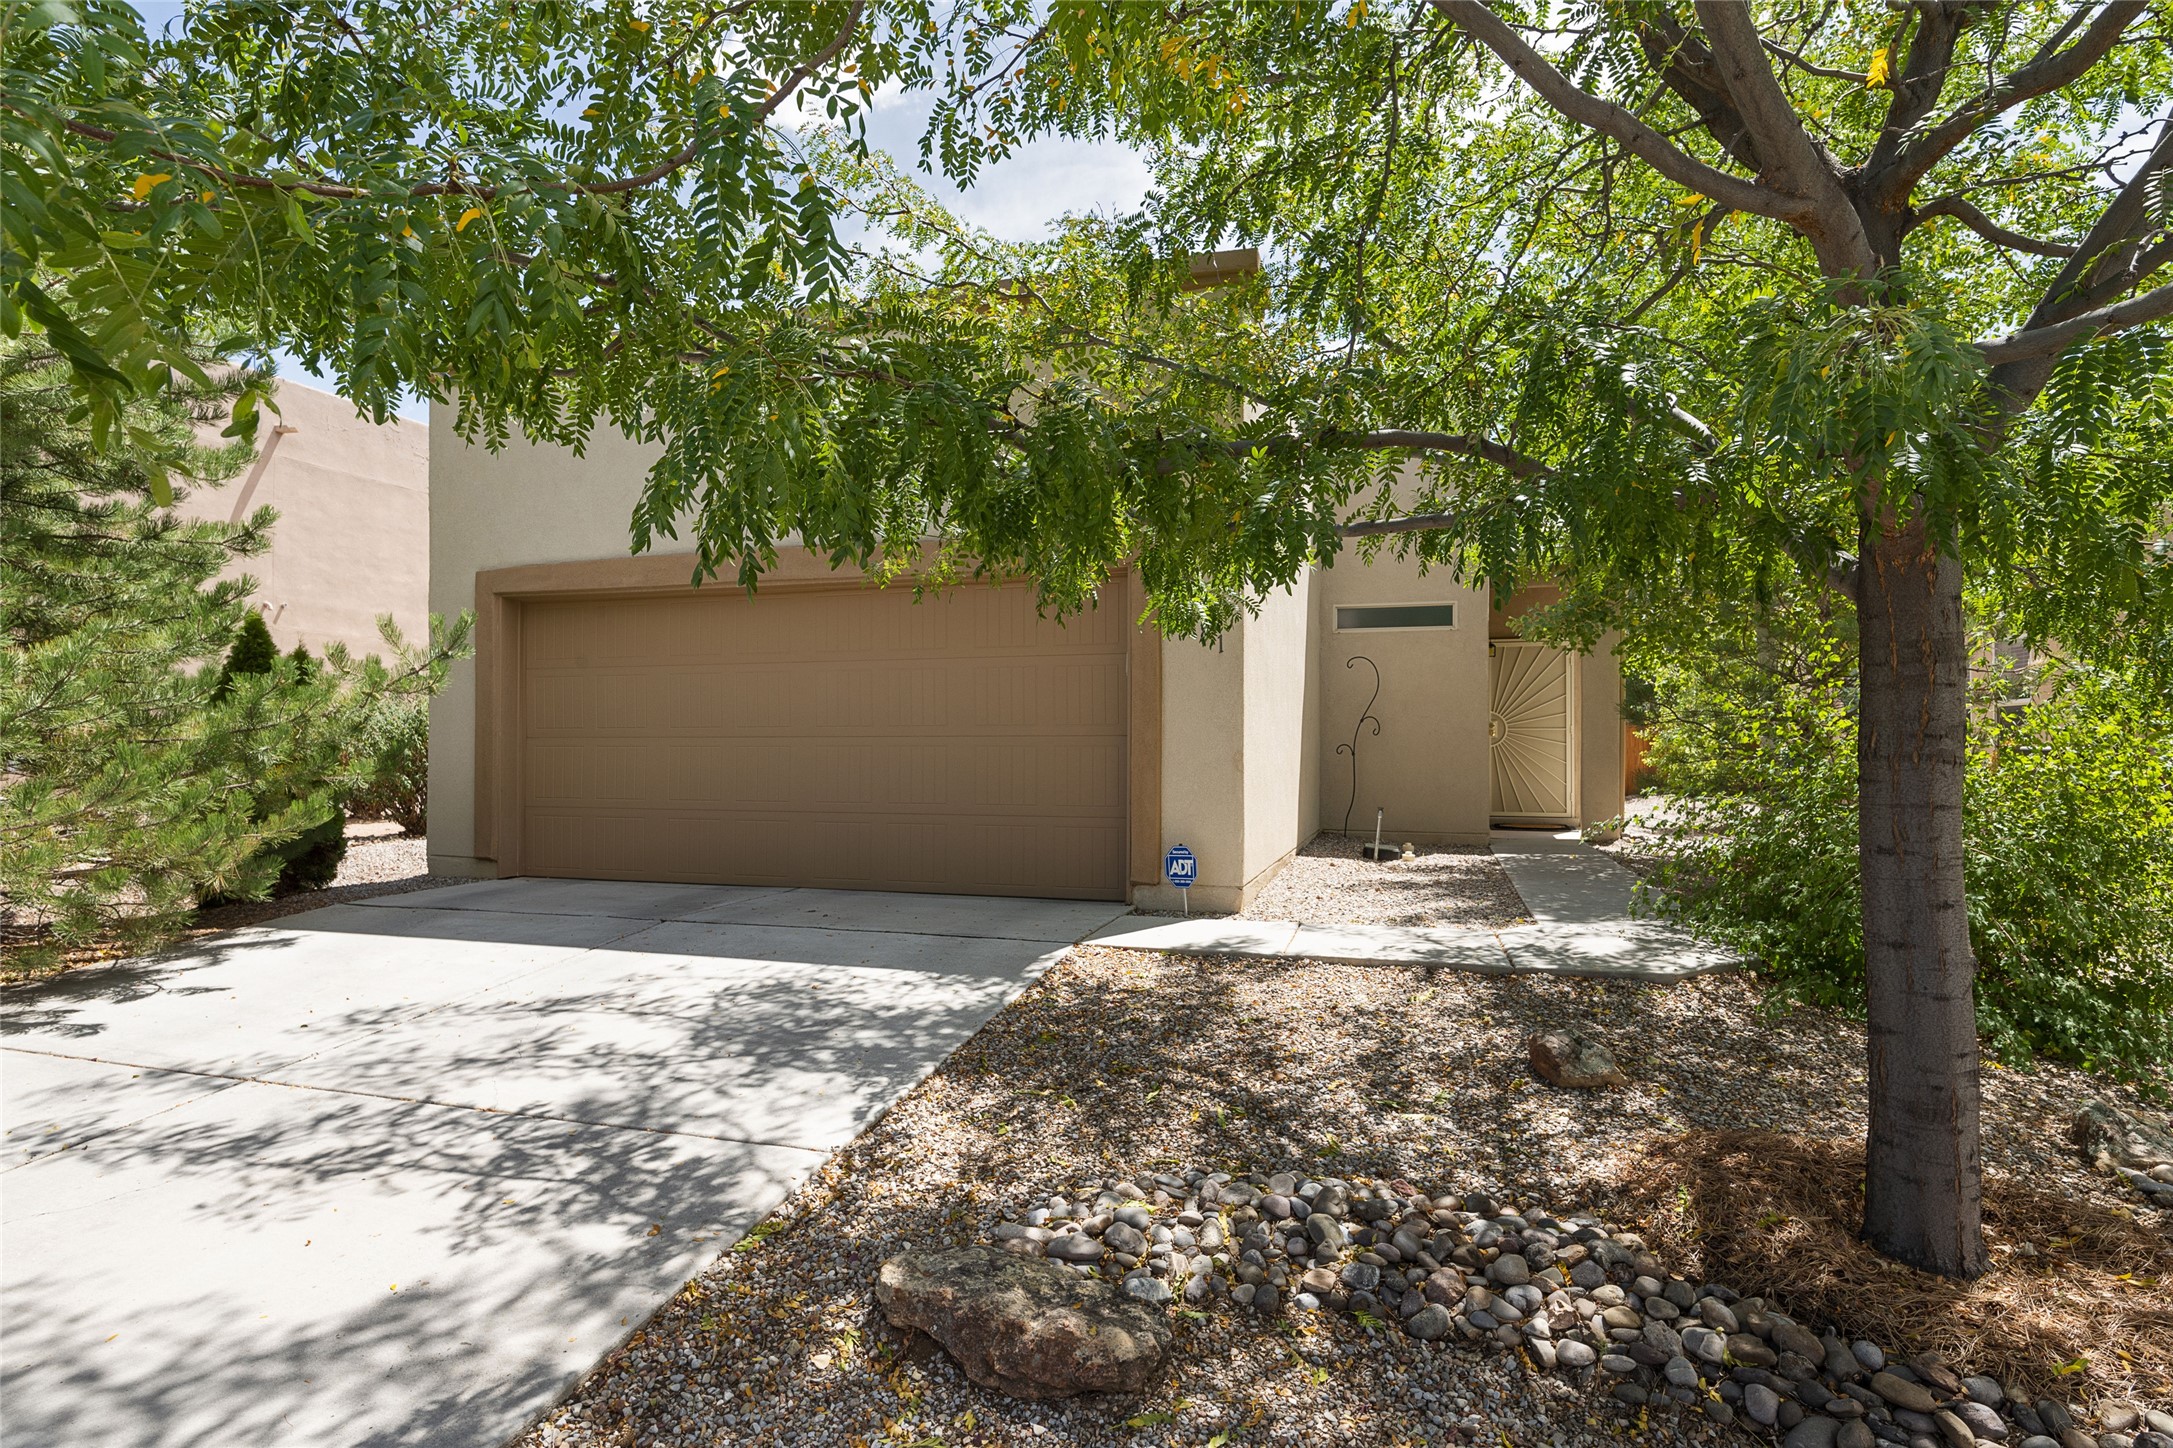 3081 Primo Colores Street, Santa Fe, New Mexico 87507, 3 Bedrooms Bedrooms, ,2 BathroomsBathrooms,Residential,For Sale,3081 Primo Colores Street,202400385